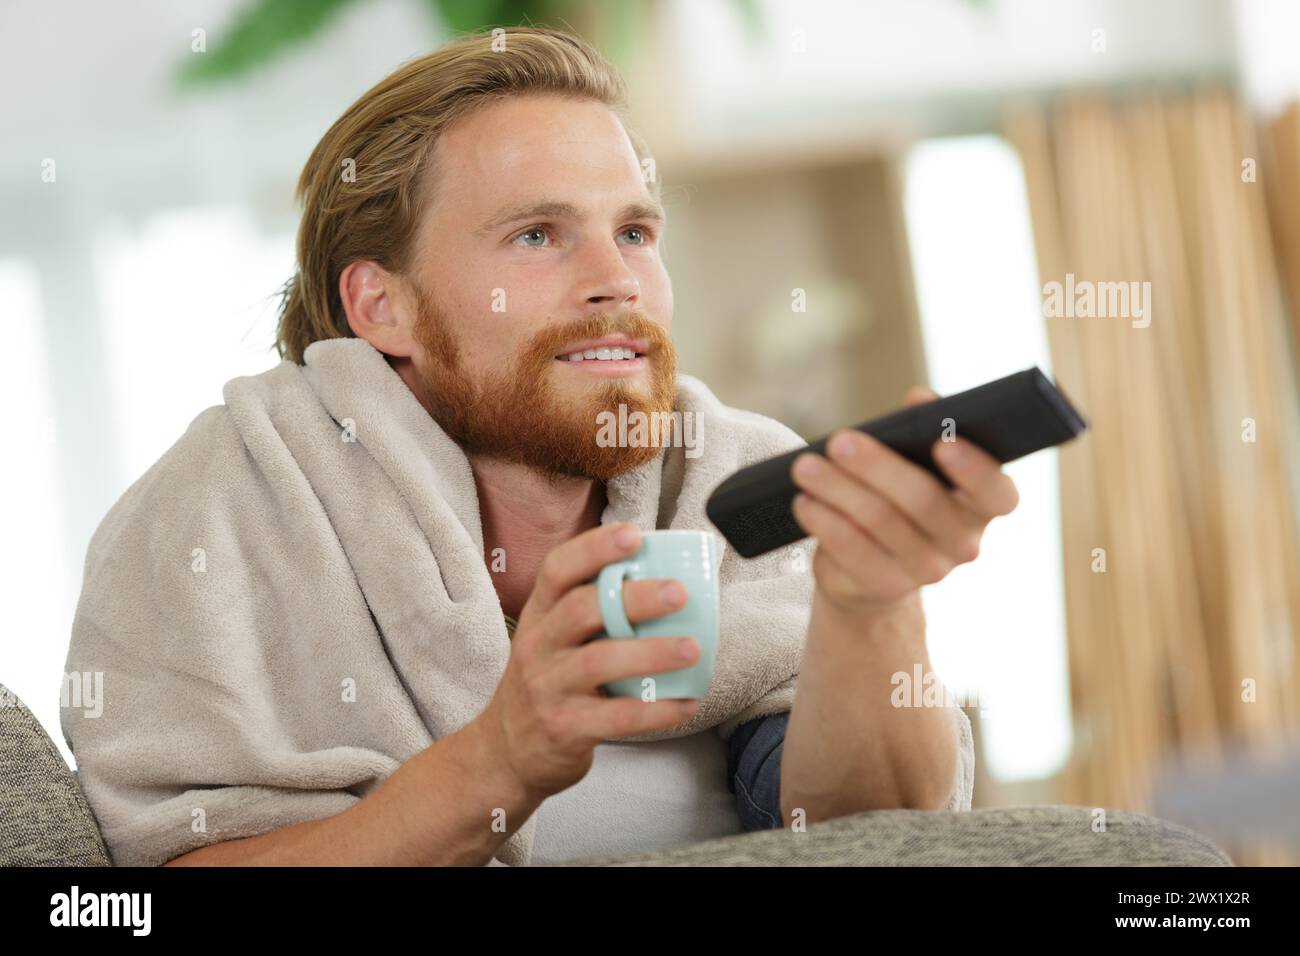 portrait of cheerful man changing channels Stock Photo